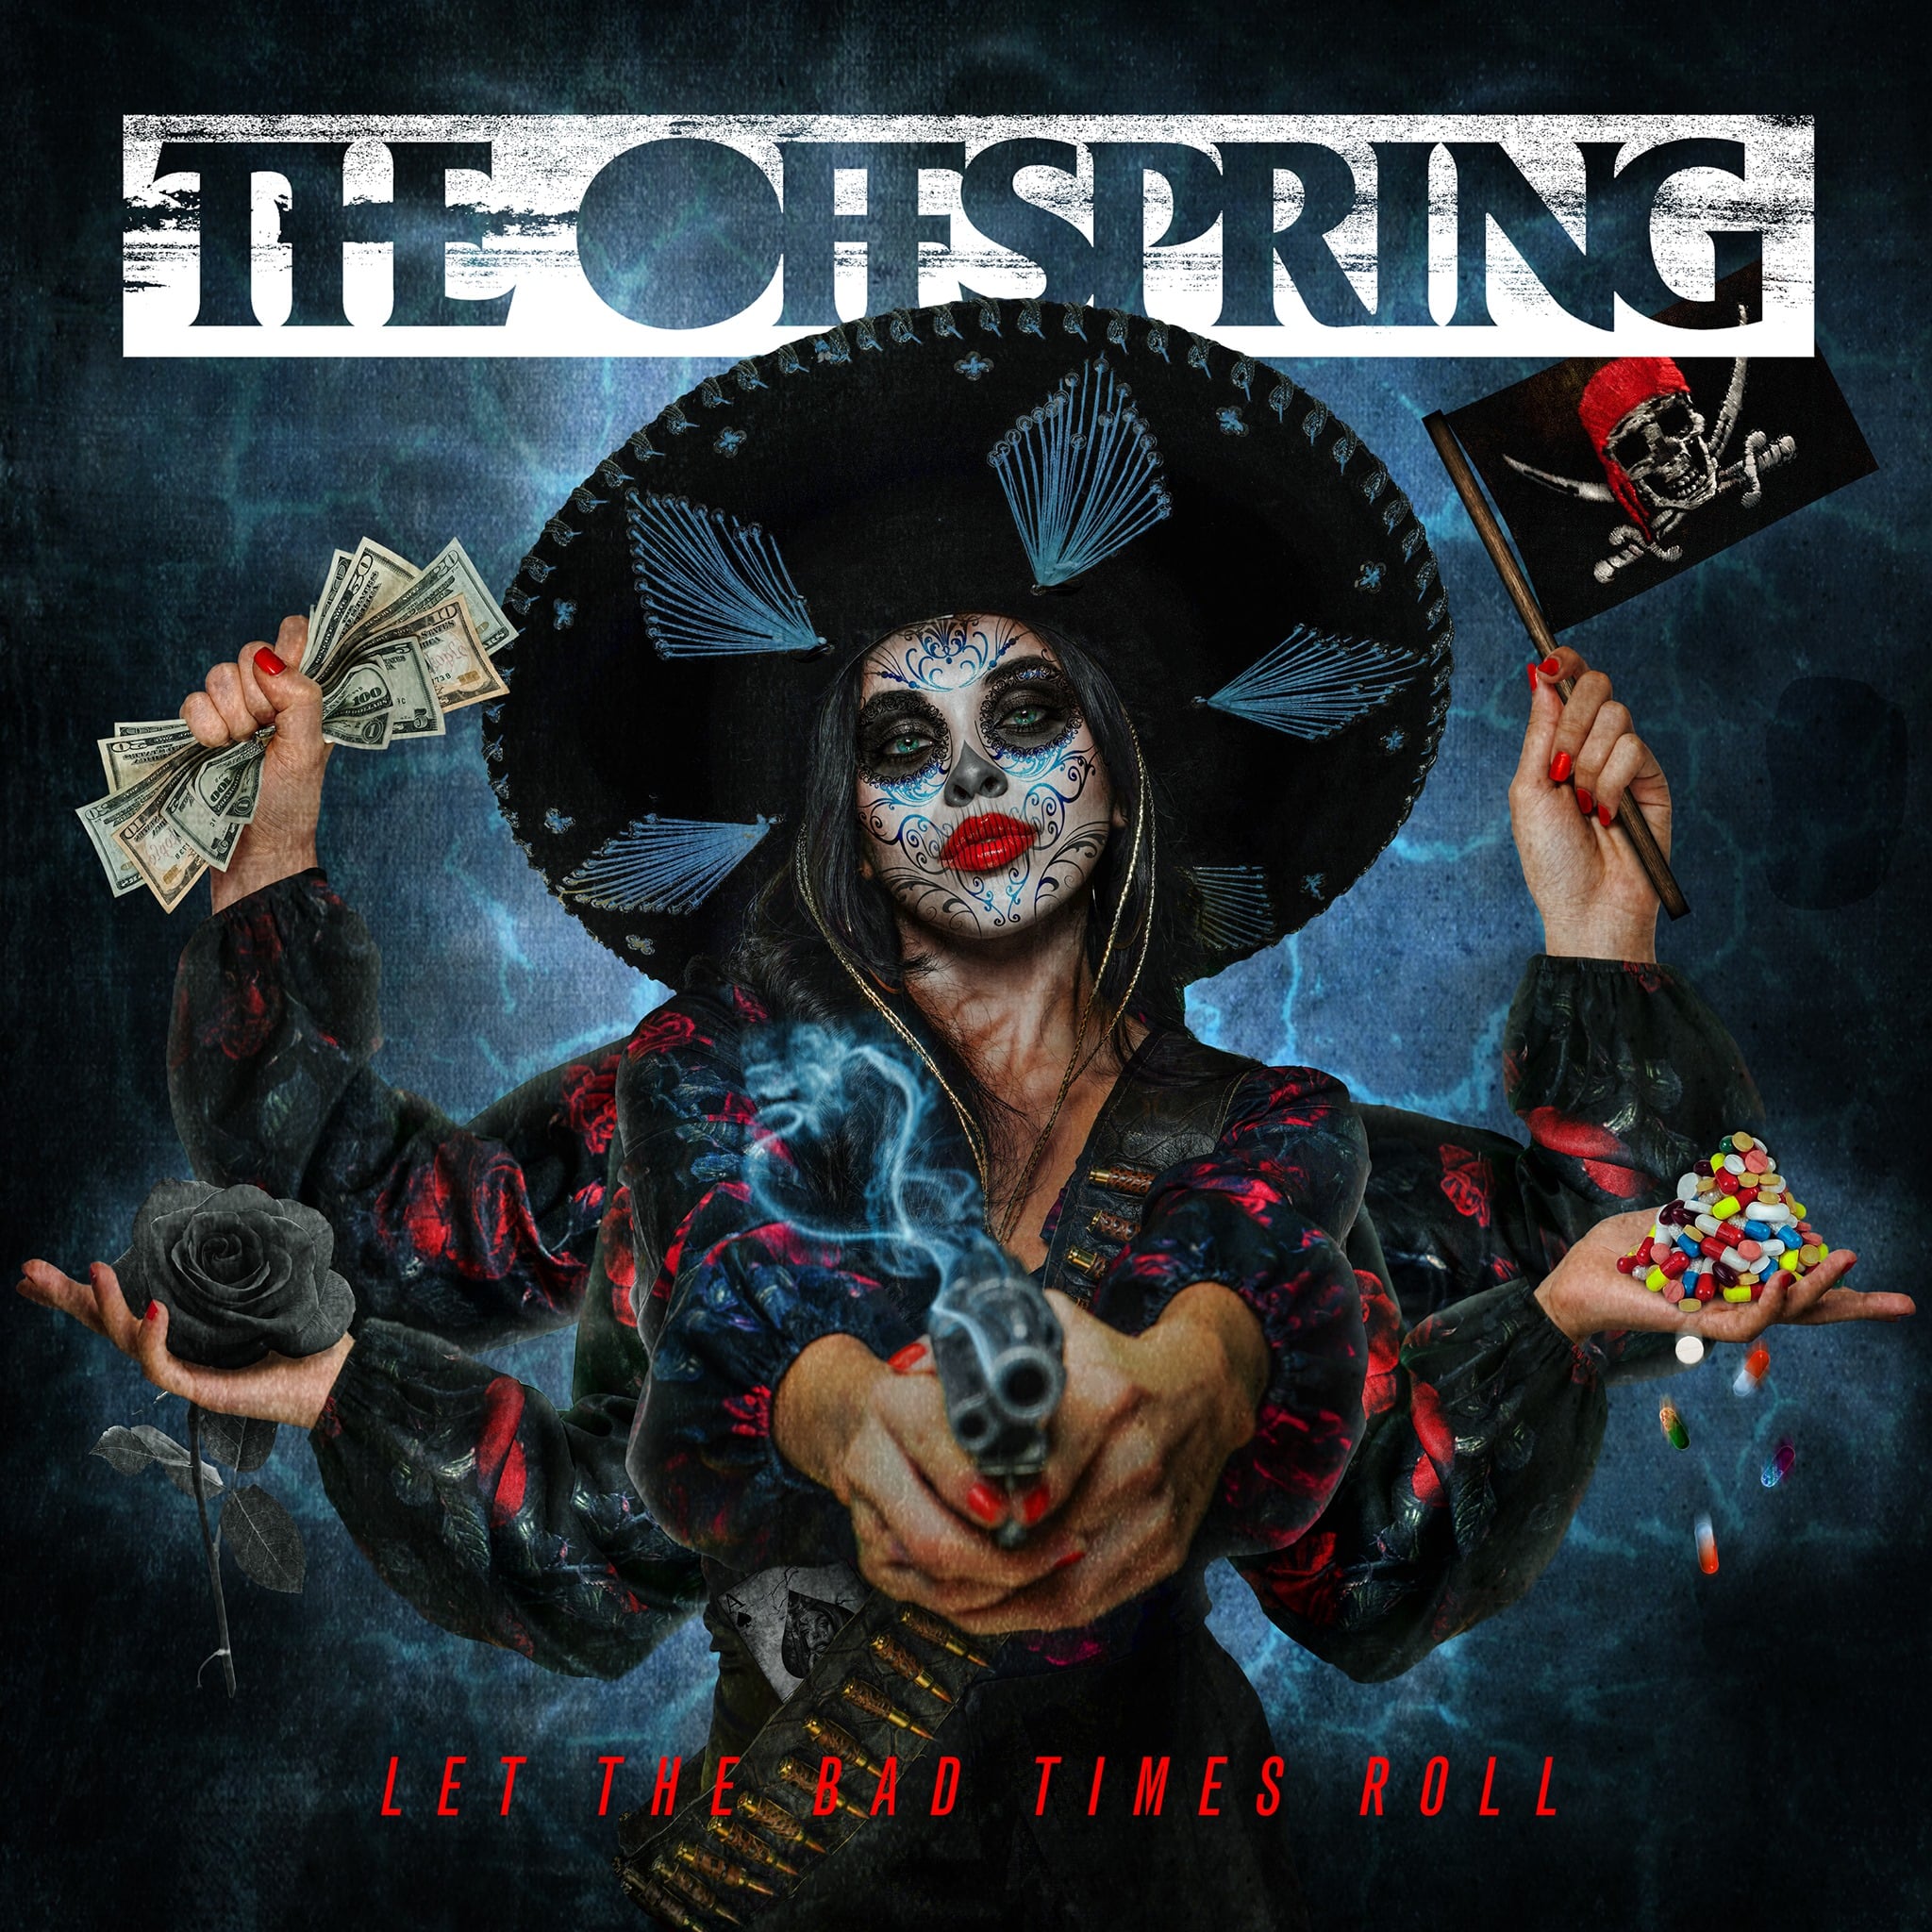 NY LÅT: The Offspring - We Never Have Sex Anymore 4